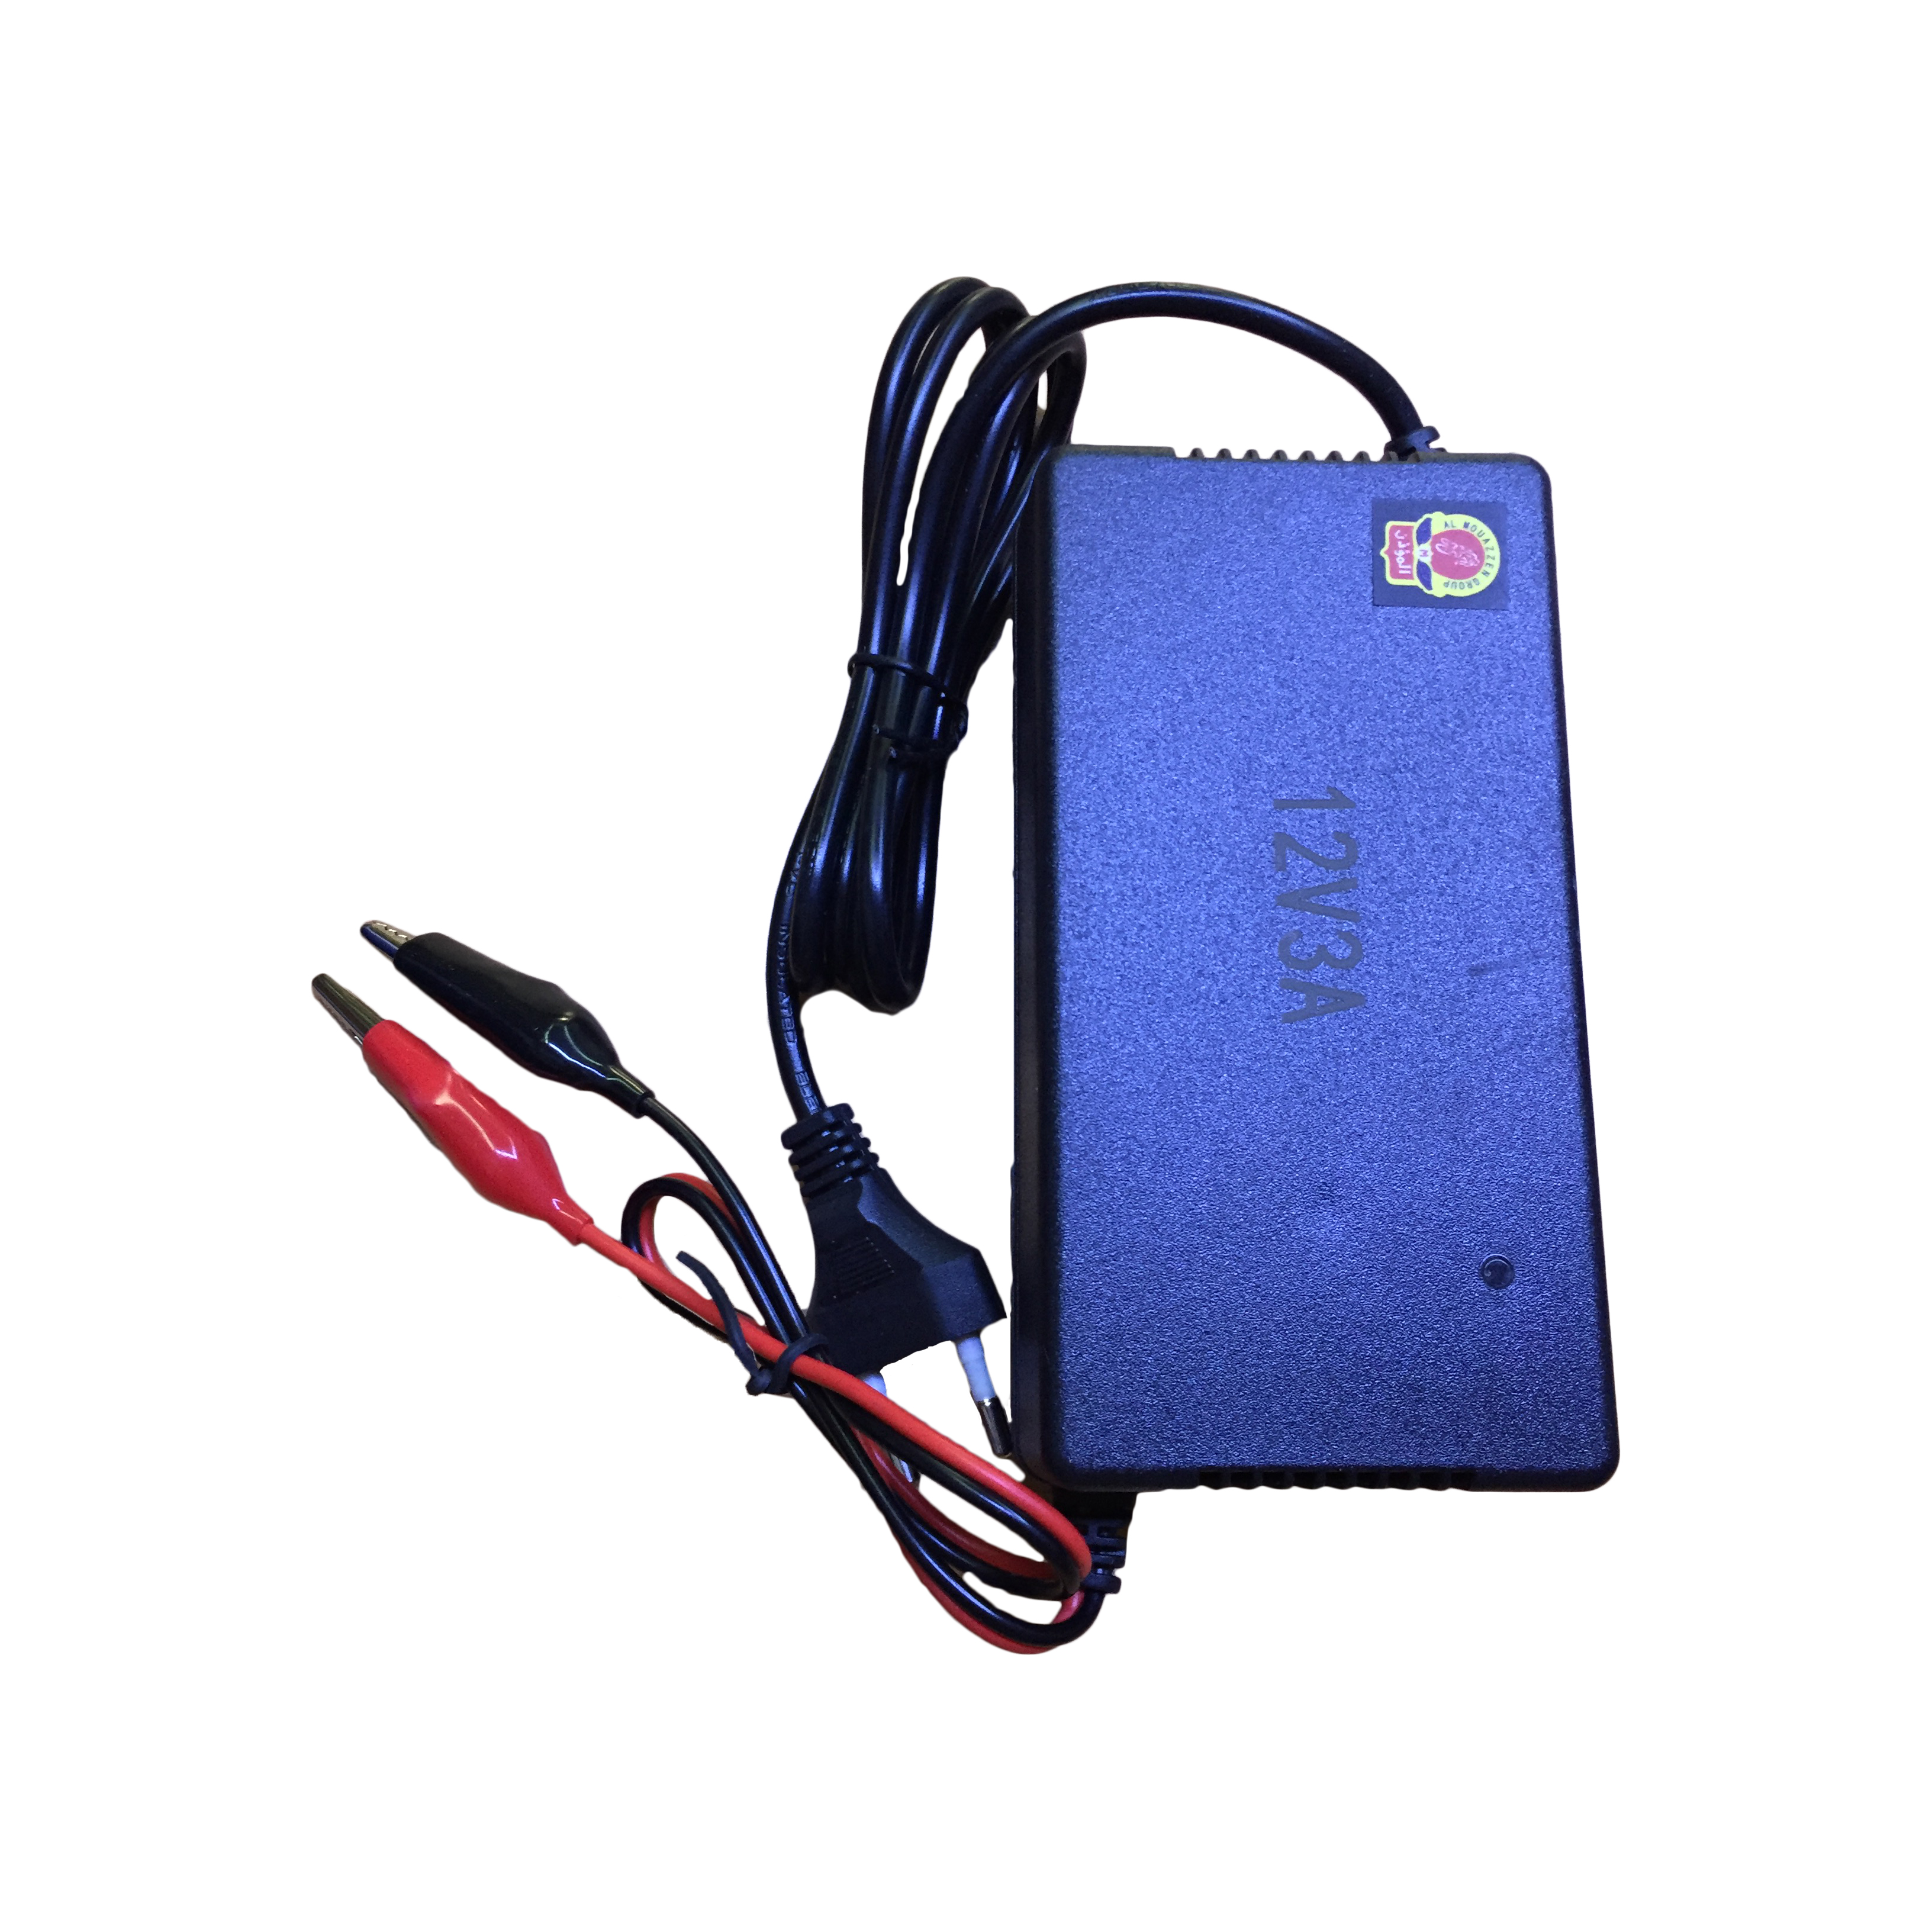 CHARGER UNIQA FOR UPS BATTERY 12V & 3A  SON-1203 شاحن المؤذن, Battery Charger